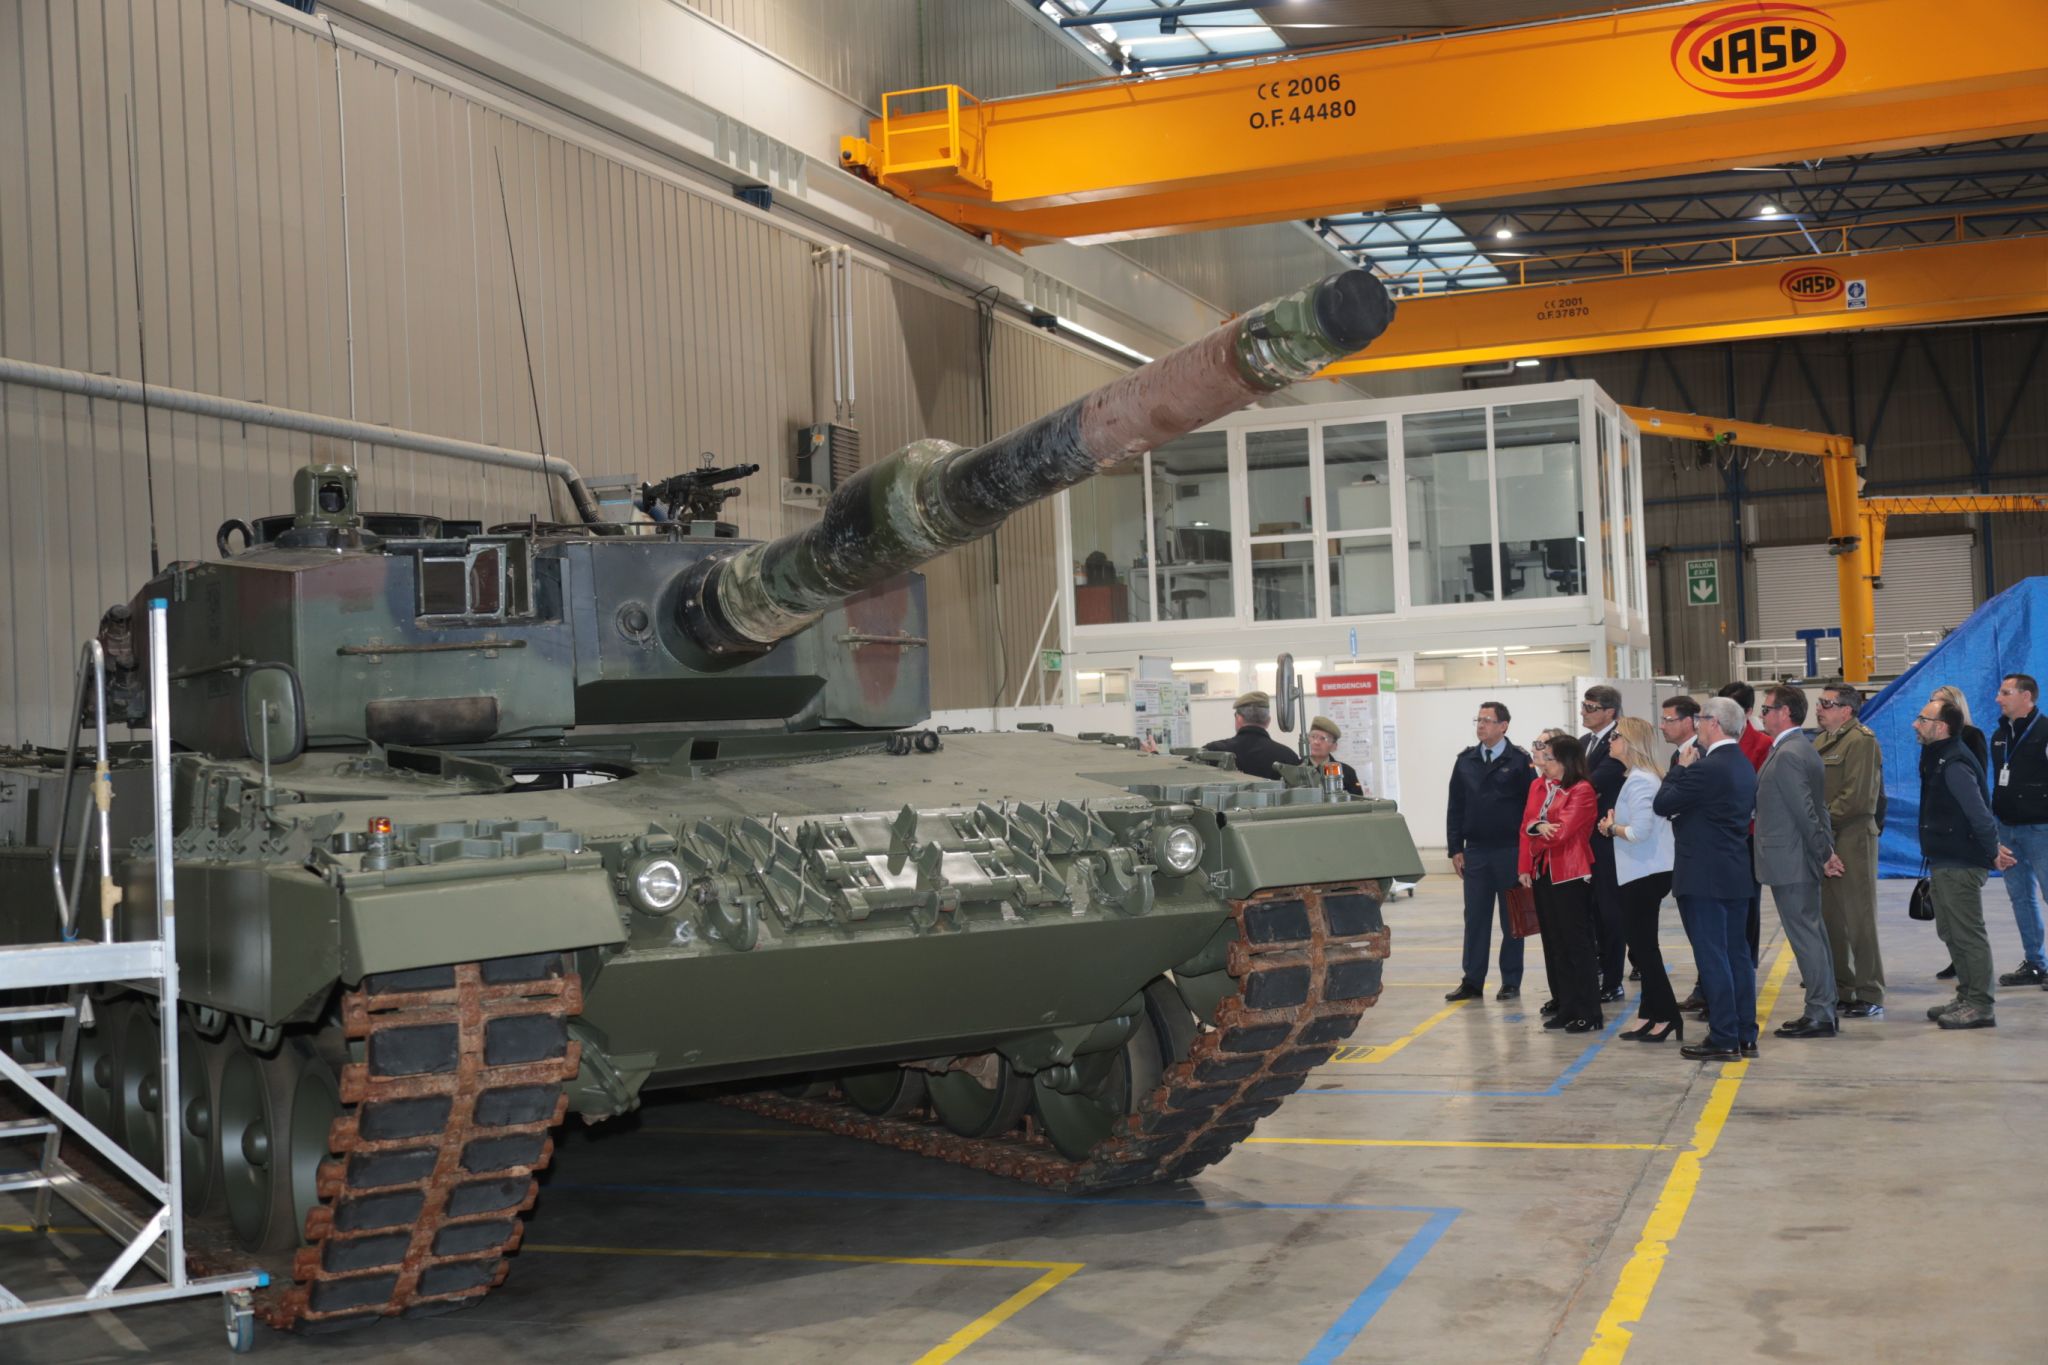 A Leopard 2A4 main battle tank is seen inside a warehouse facility, where 15 onlookers stand by its left side while inspecting it. The tank is painted in camouflage colors.